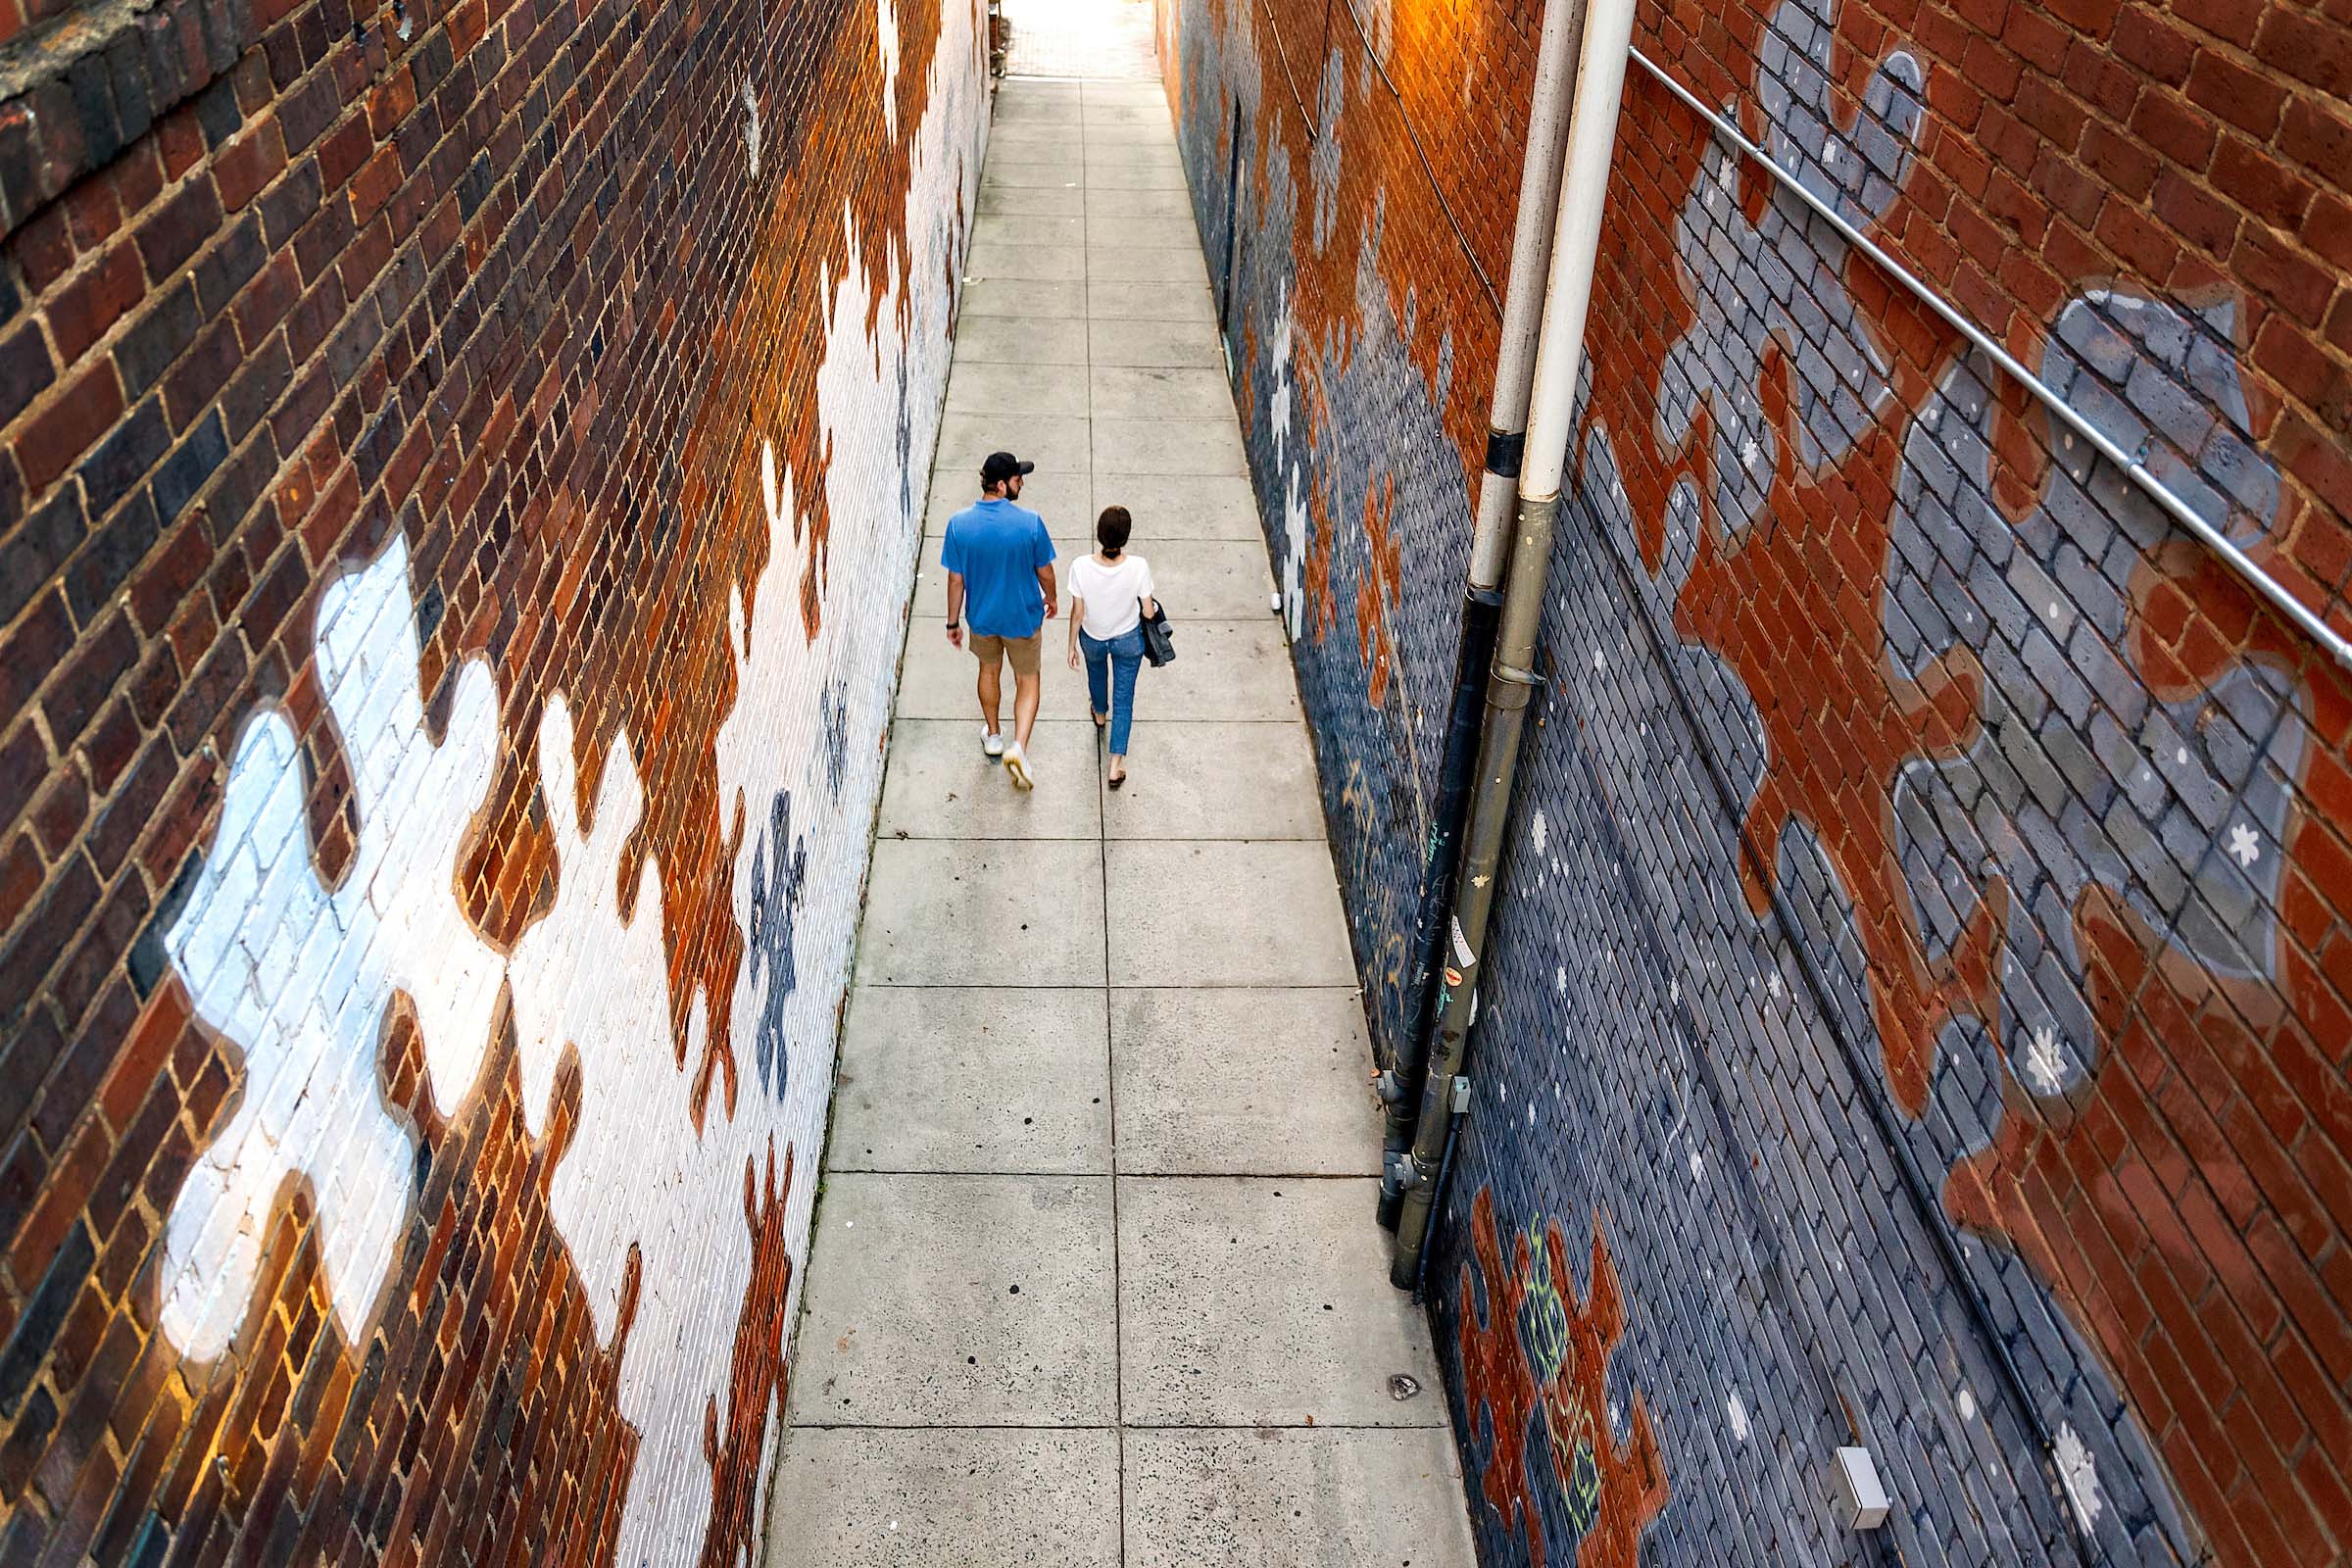 Two people walk in an alley with a mural of puzzle pieces on the side.